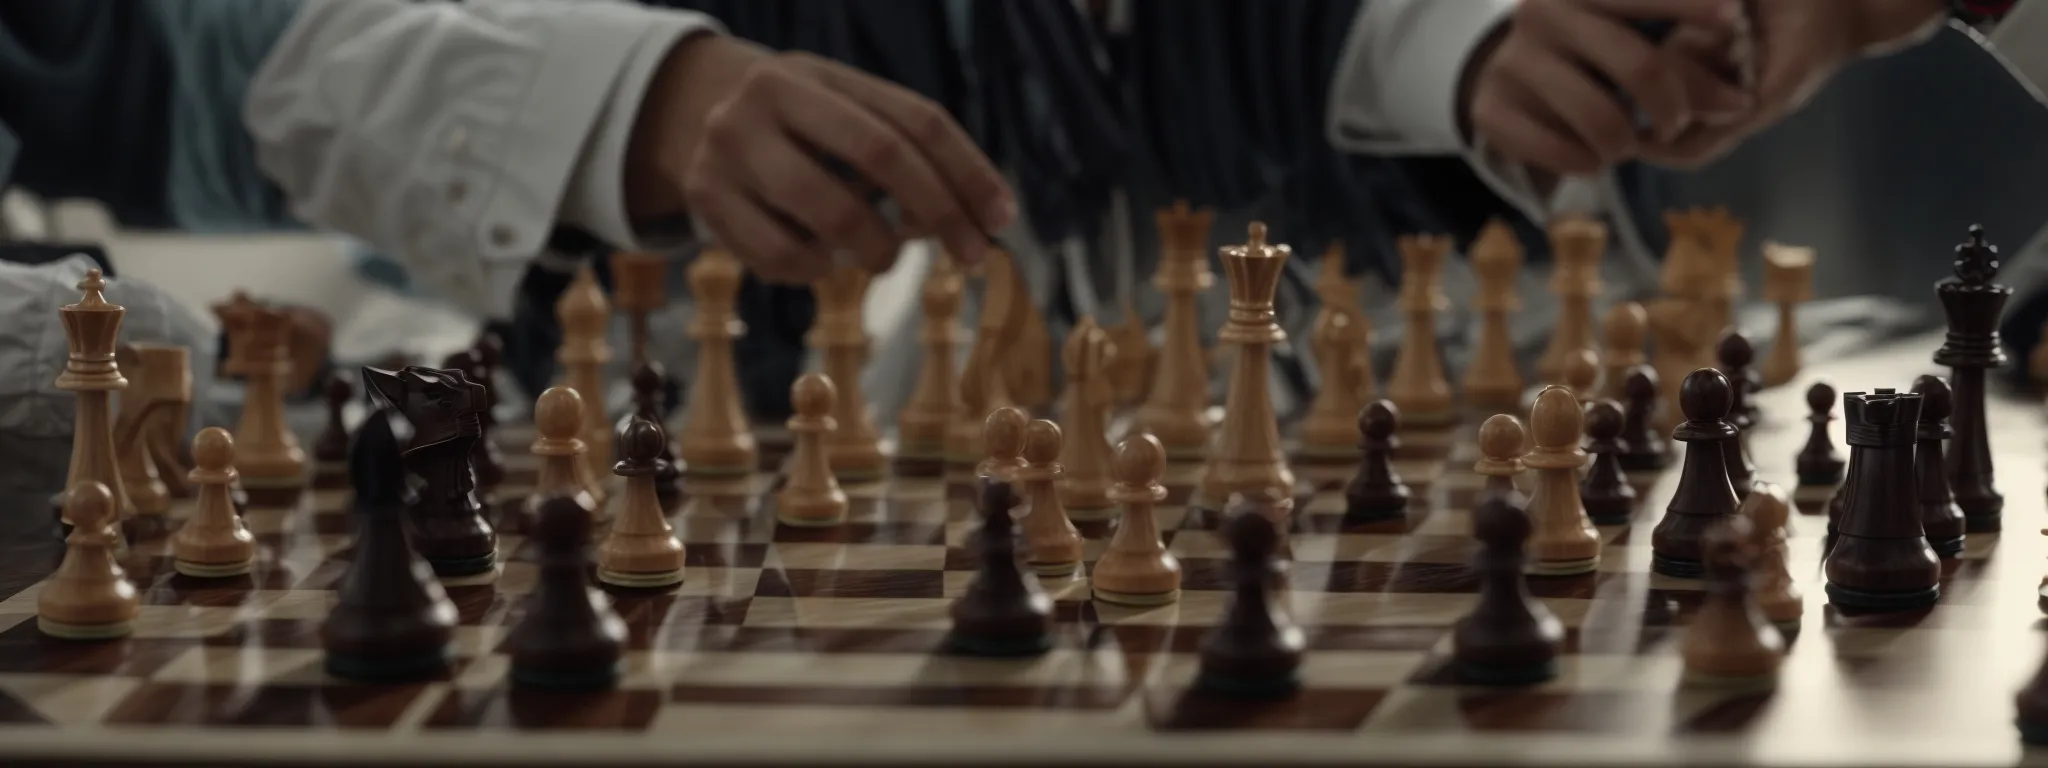 a tactician masterfully maneuvers chess pieces on a board, symbolizing strategic seo planning.